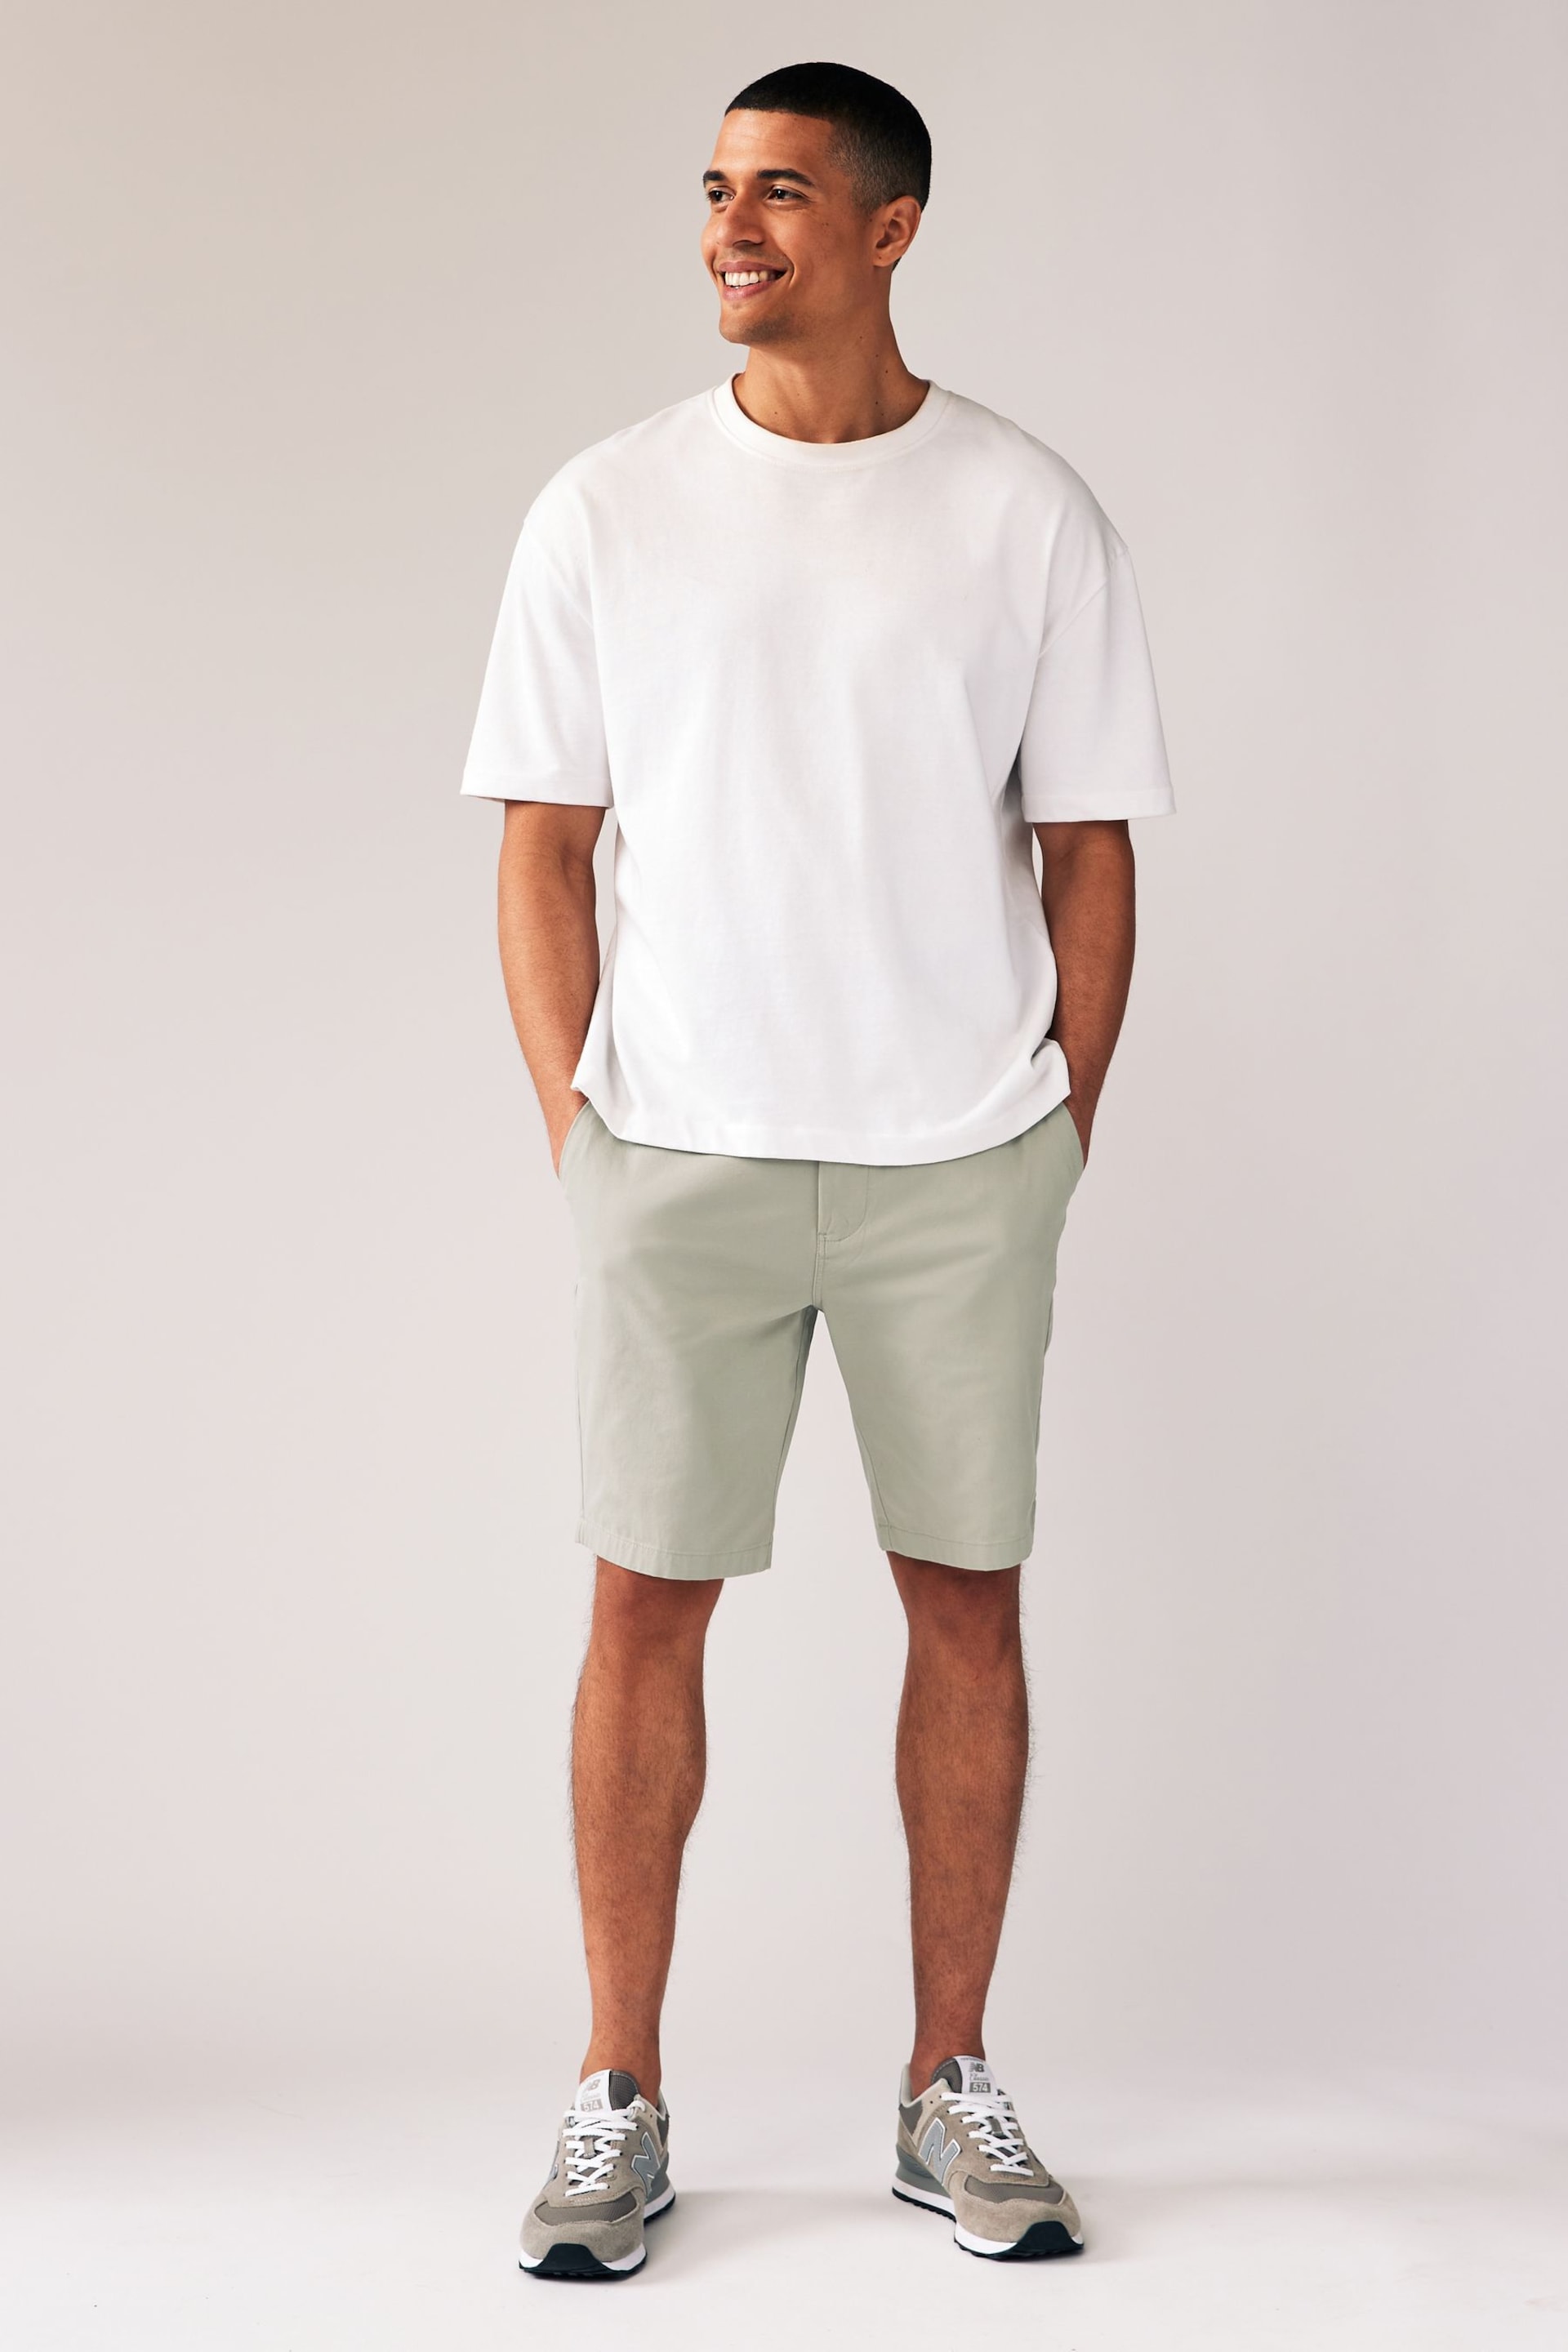 Green/Pink Slim Fit Stretch Chinos Shorts 2 Pack - Image 3 of 11